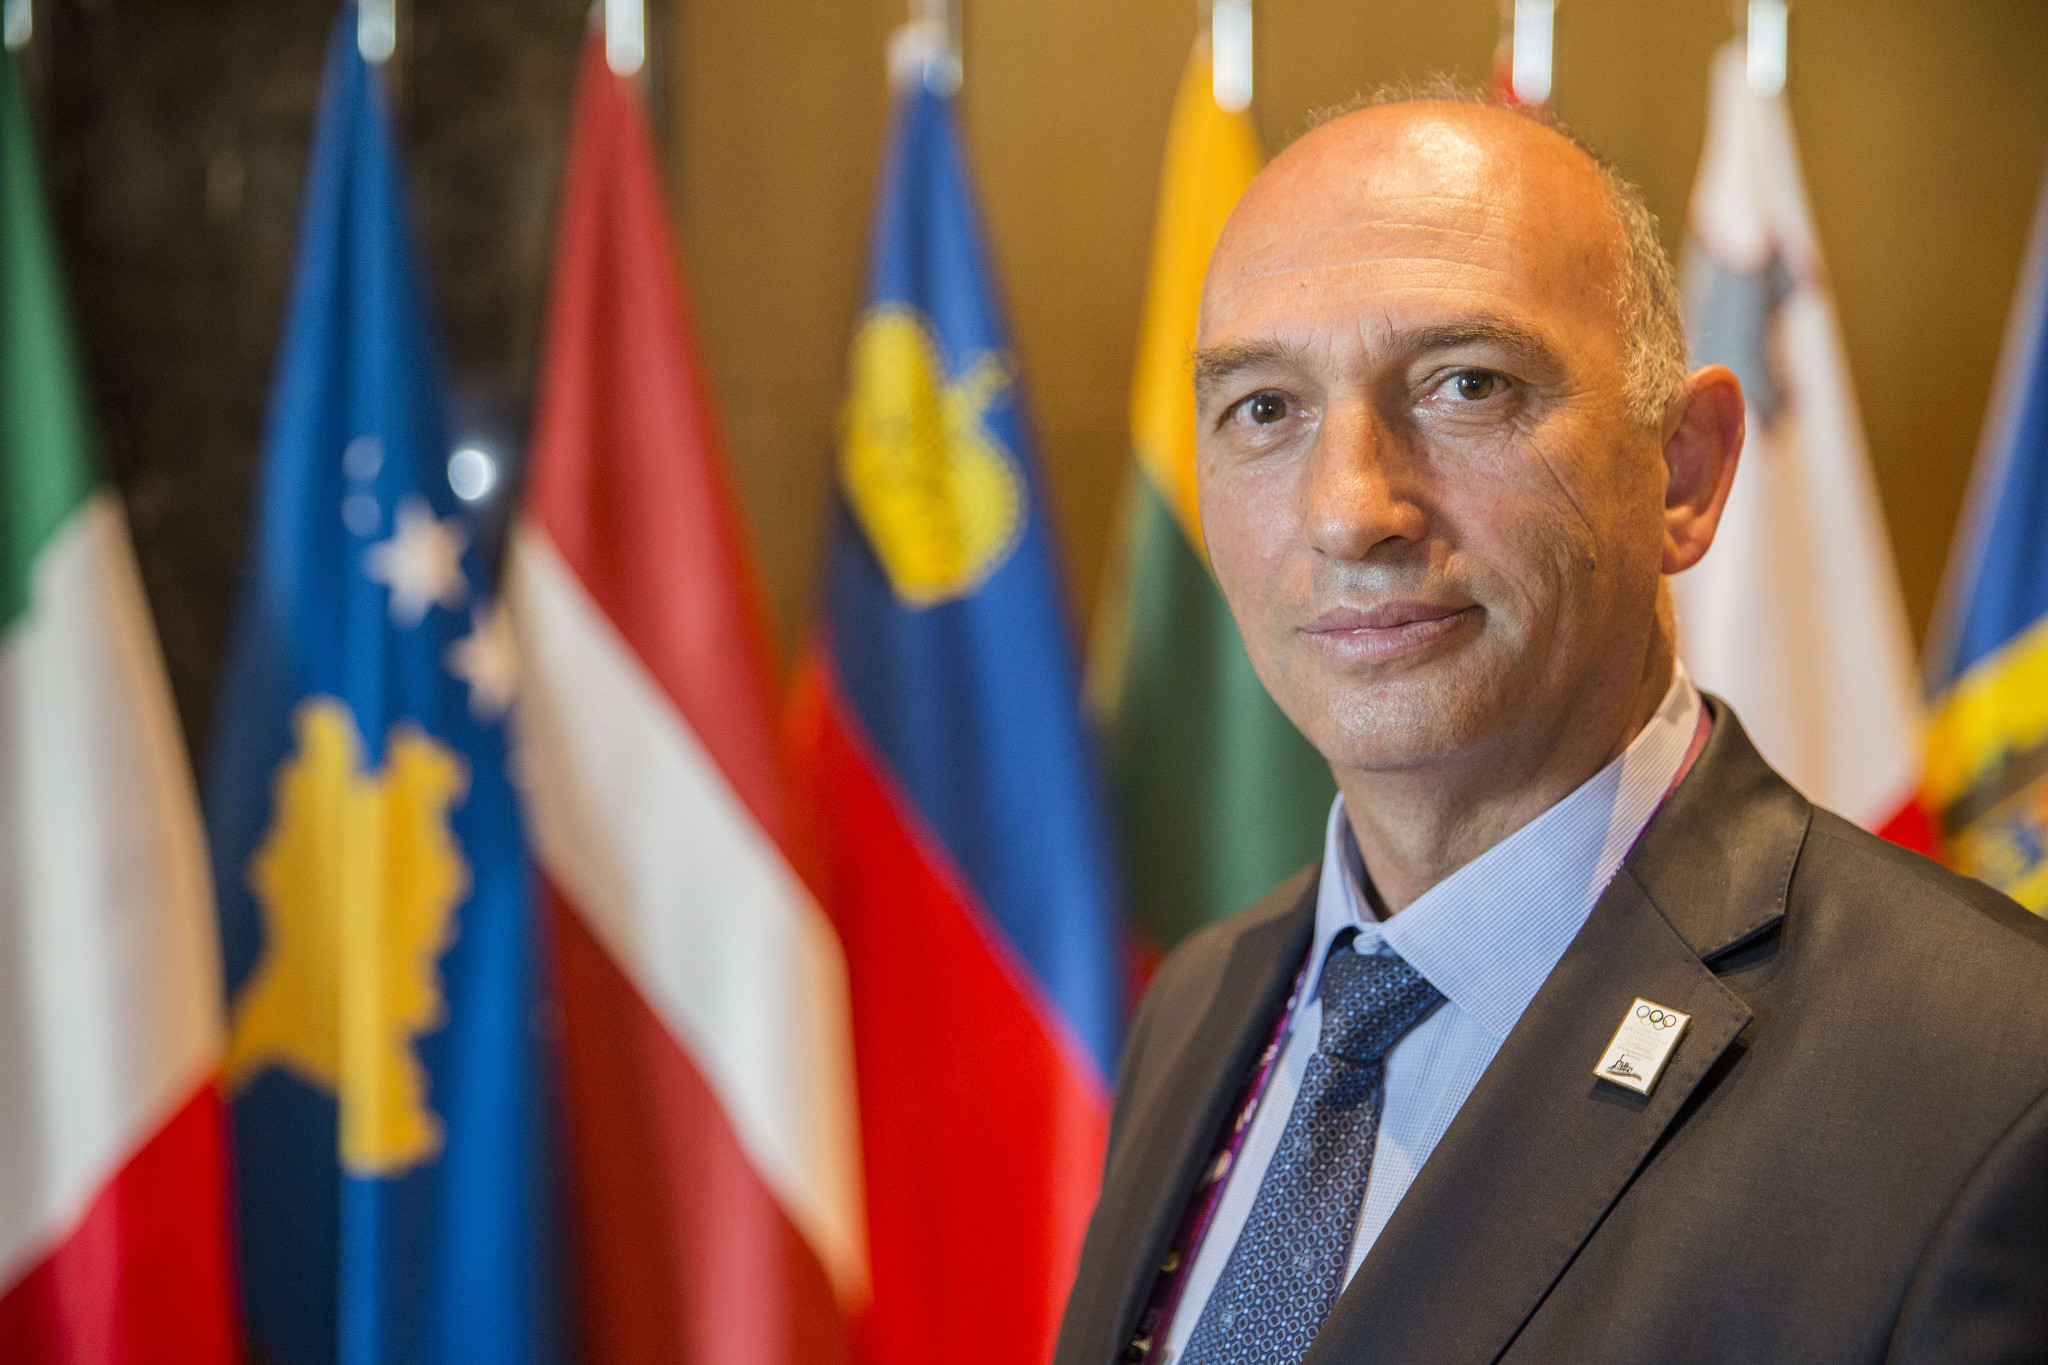 Kosovo NOC President Besim Hasani has signed up to stringent new ethical codes ©Getty Images